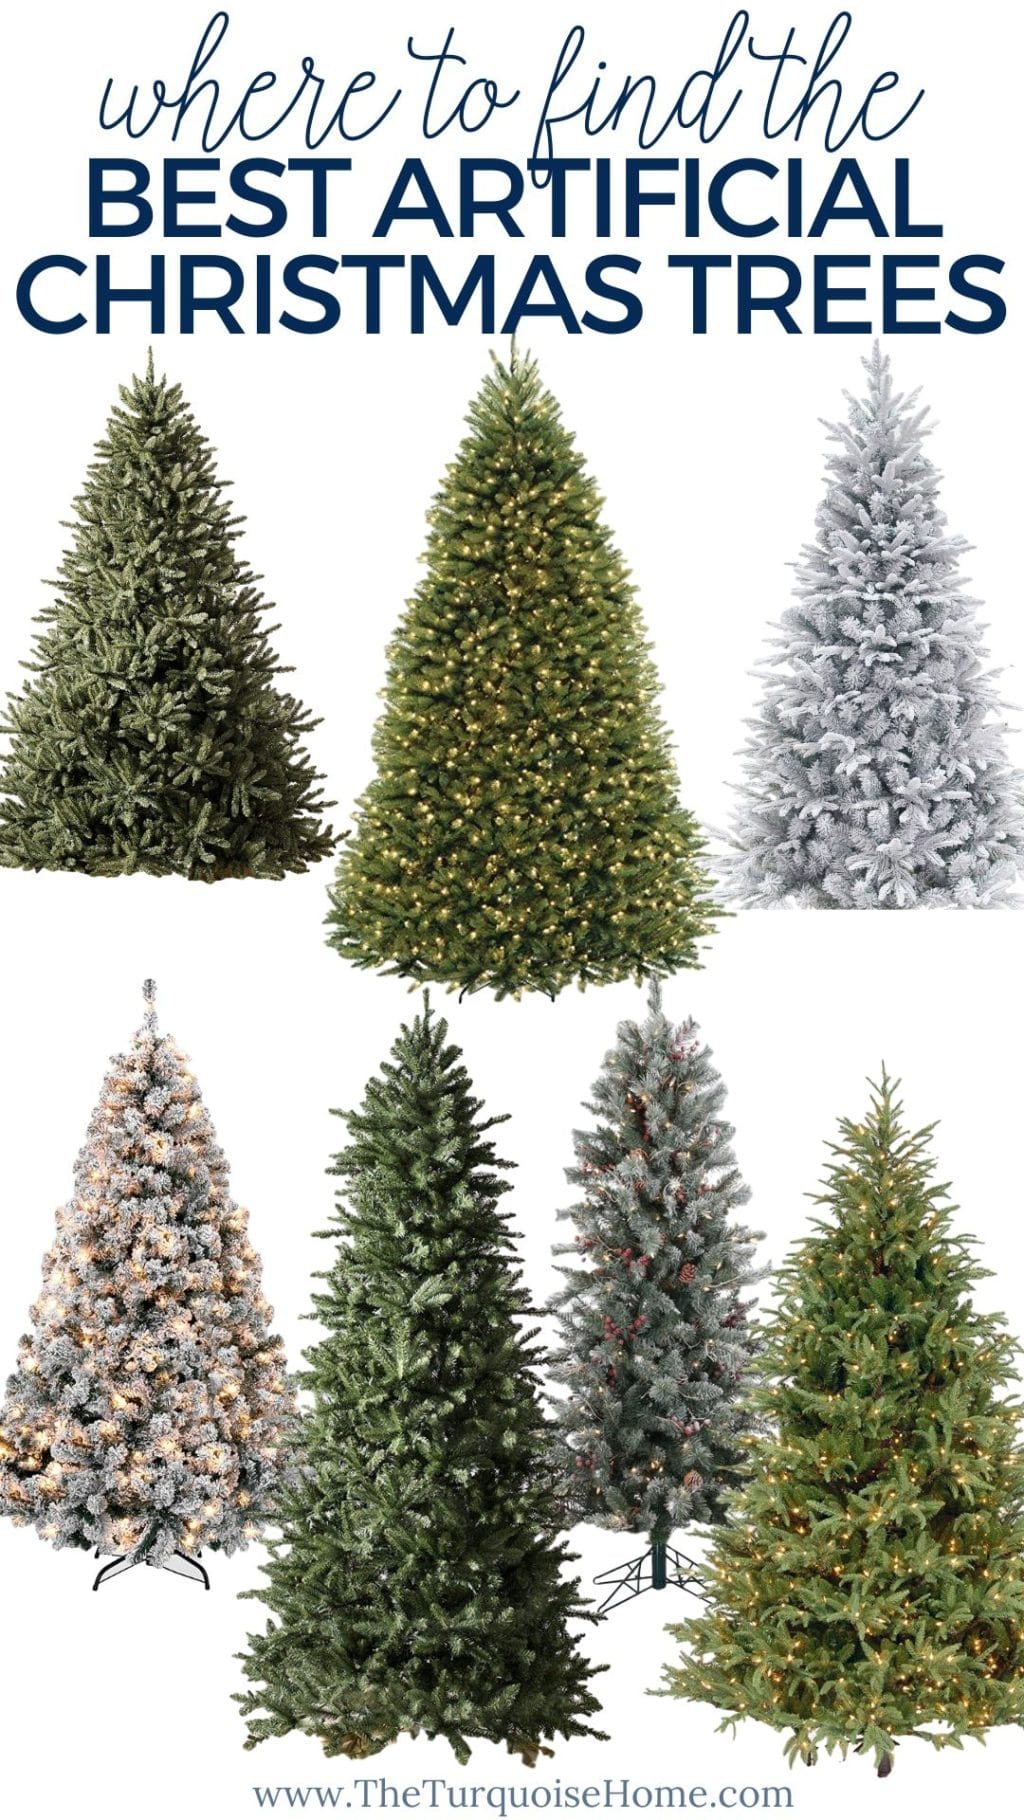 The Best Artificial Christmas Trees of 2021